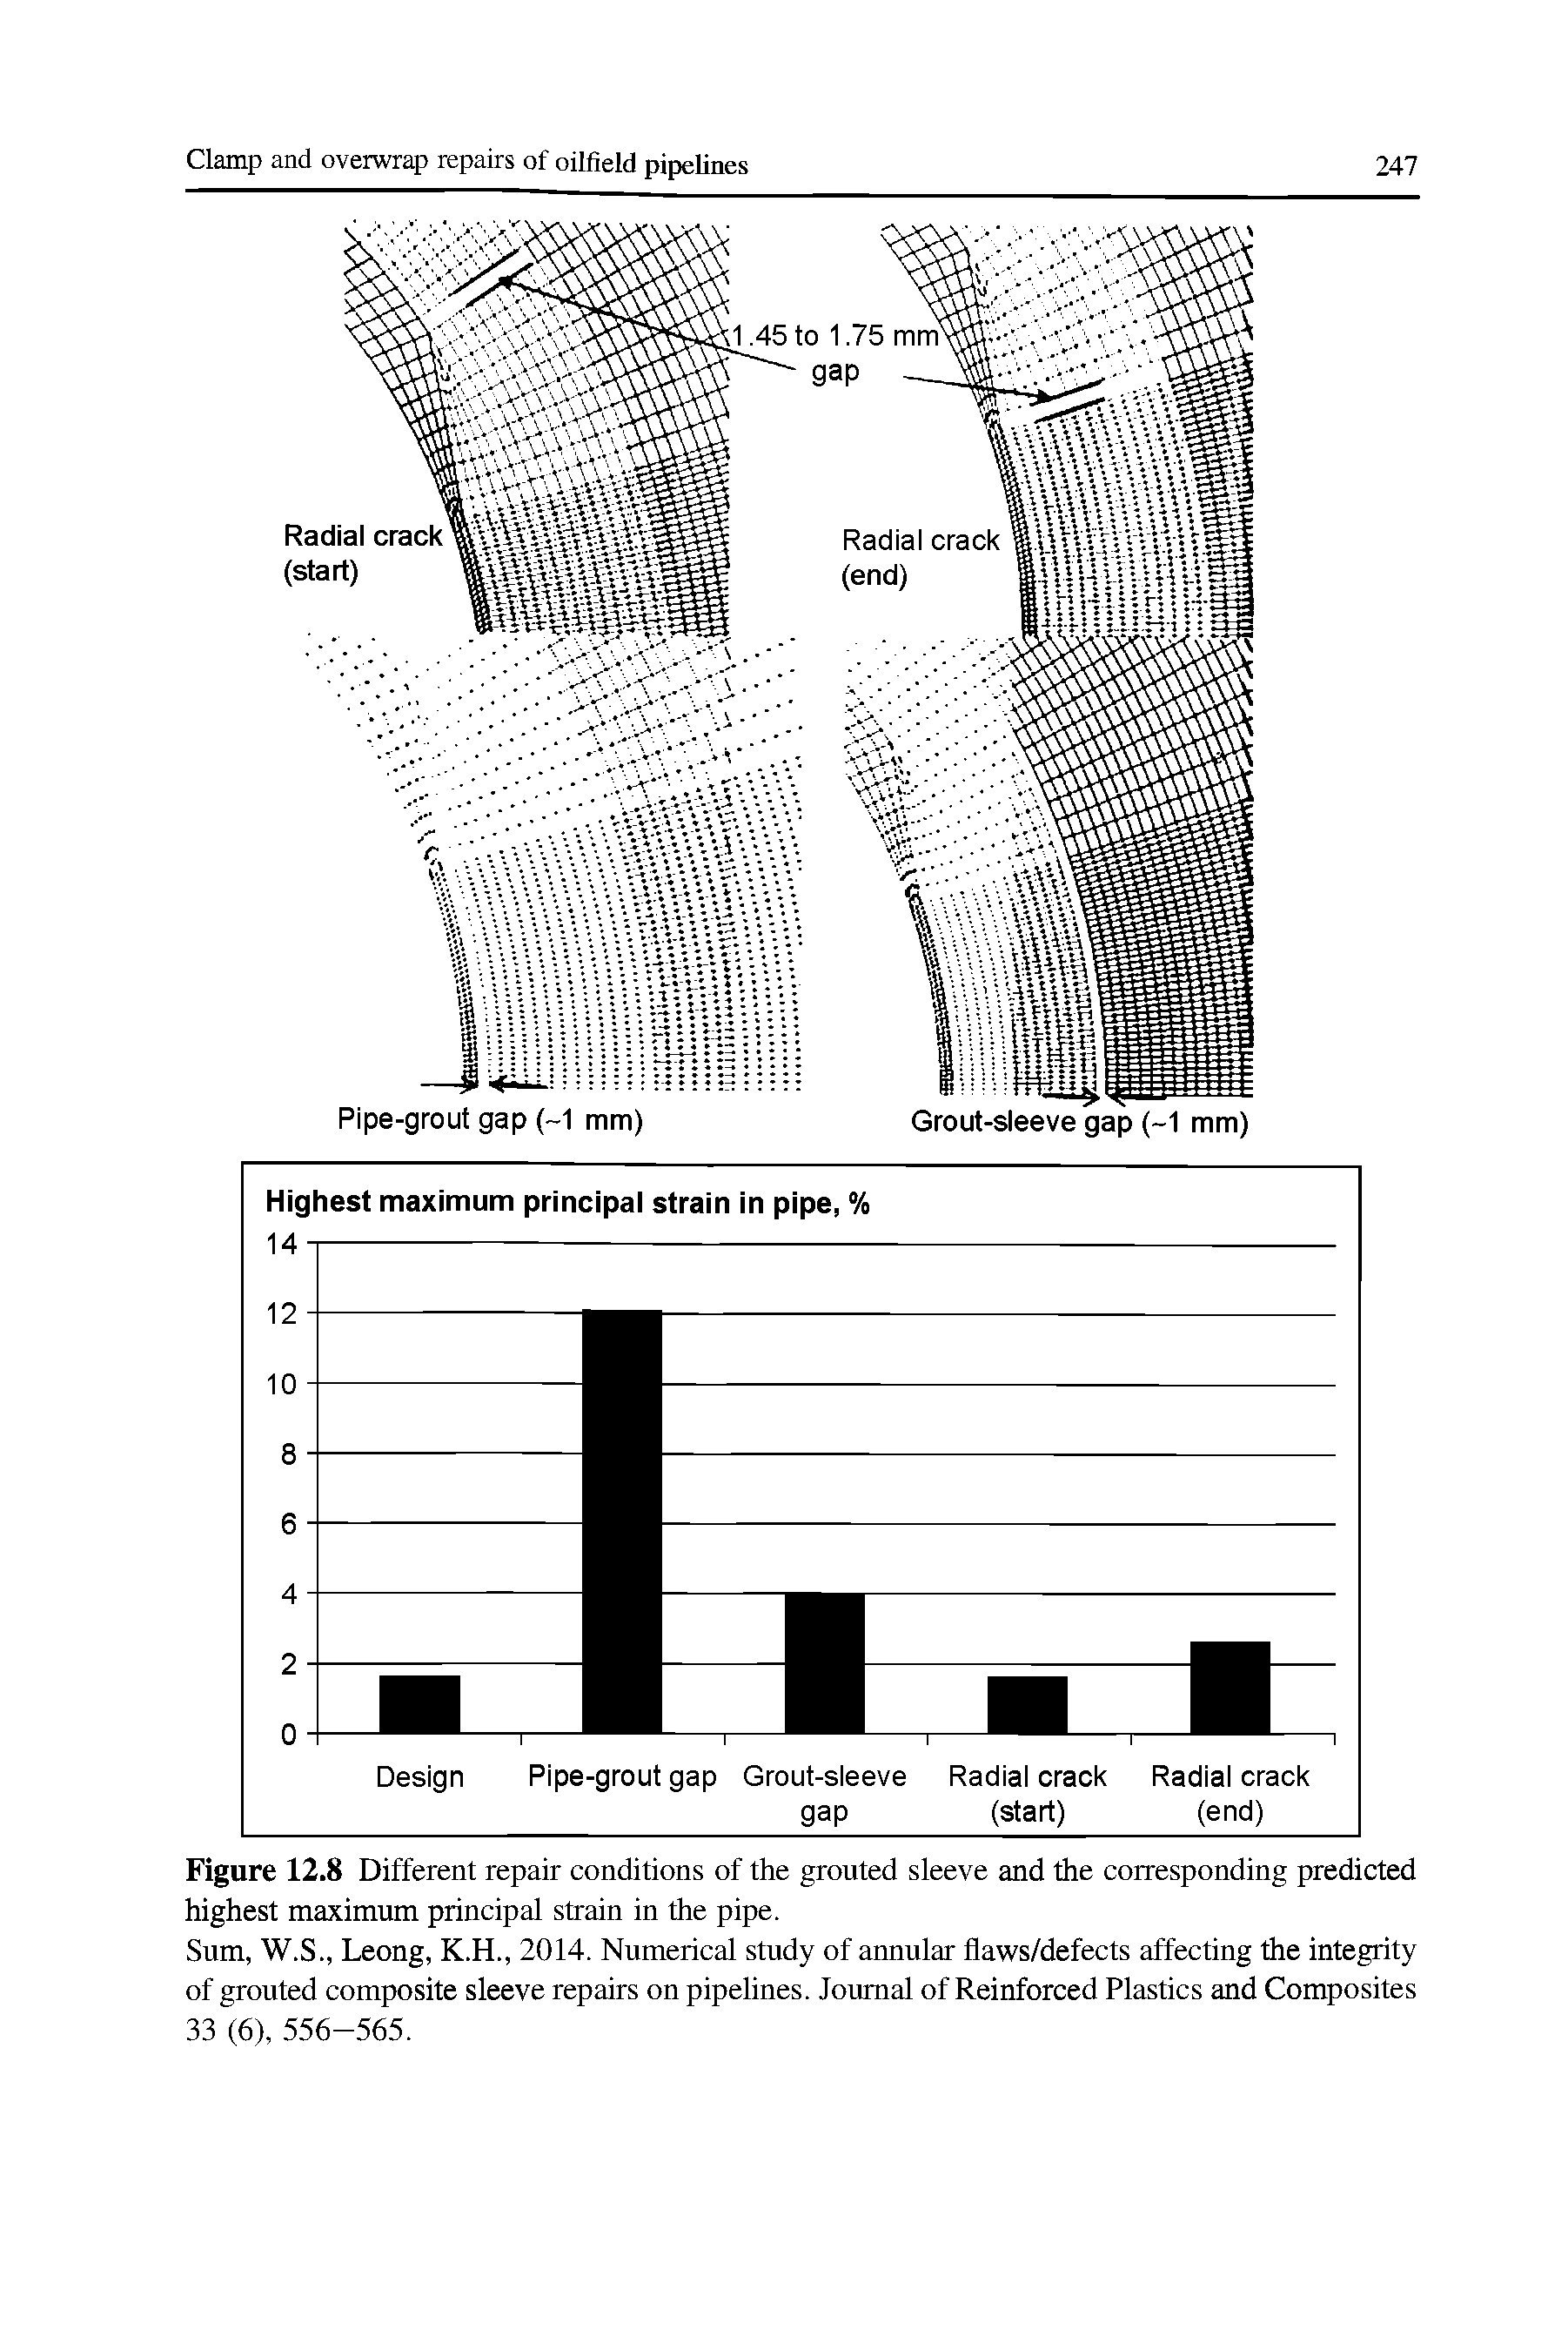 Figure 12.8 Different repair conditions of the grouted sleeve and the corresponding predicted highest maximum principal strain in the pipe.